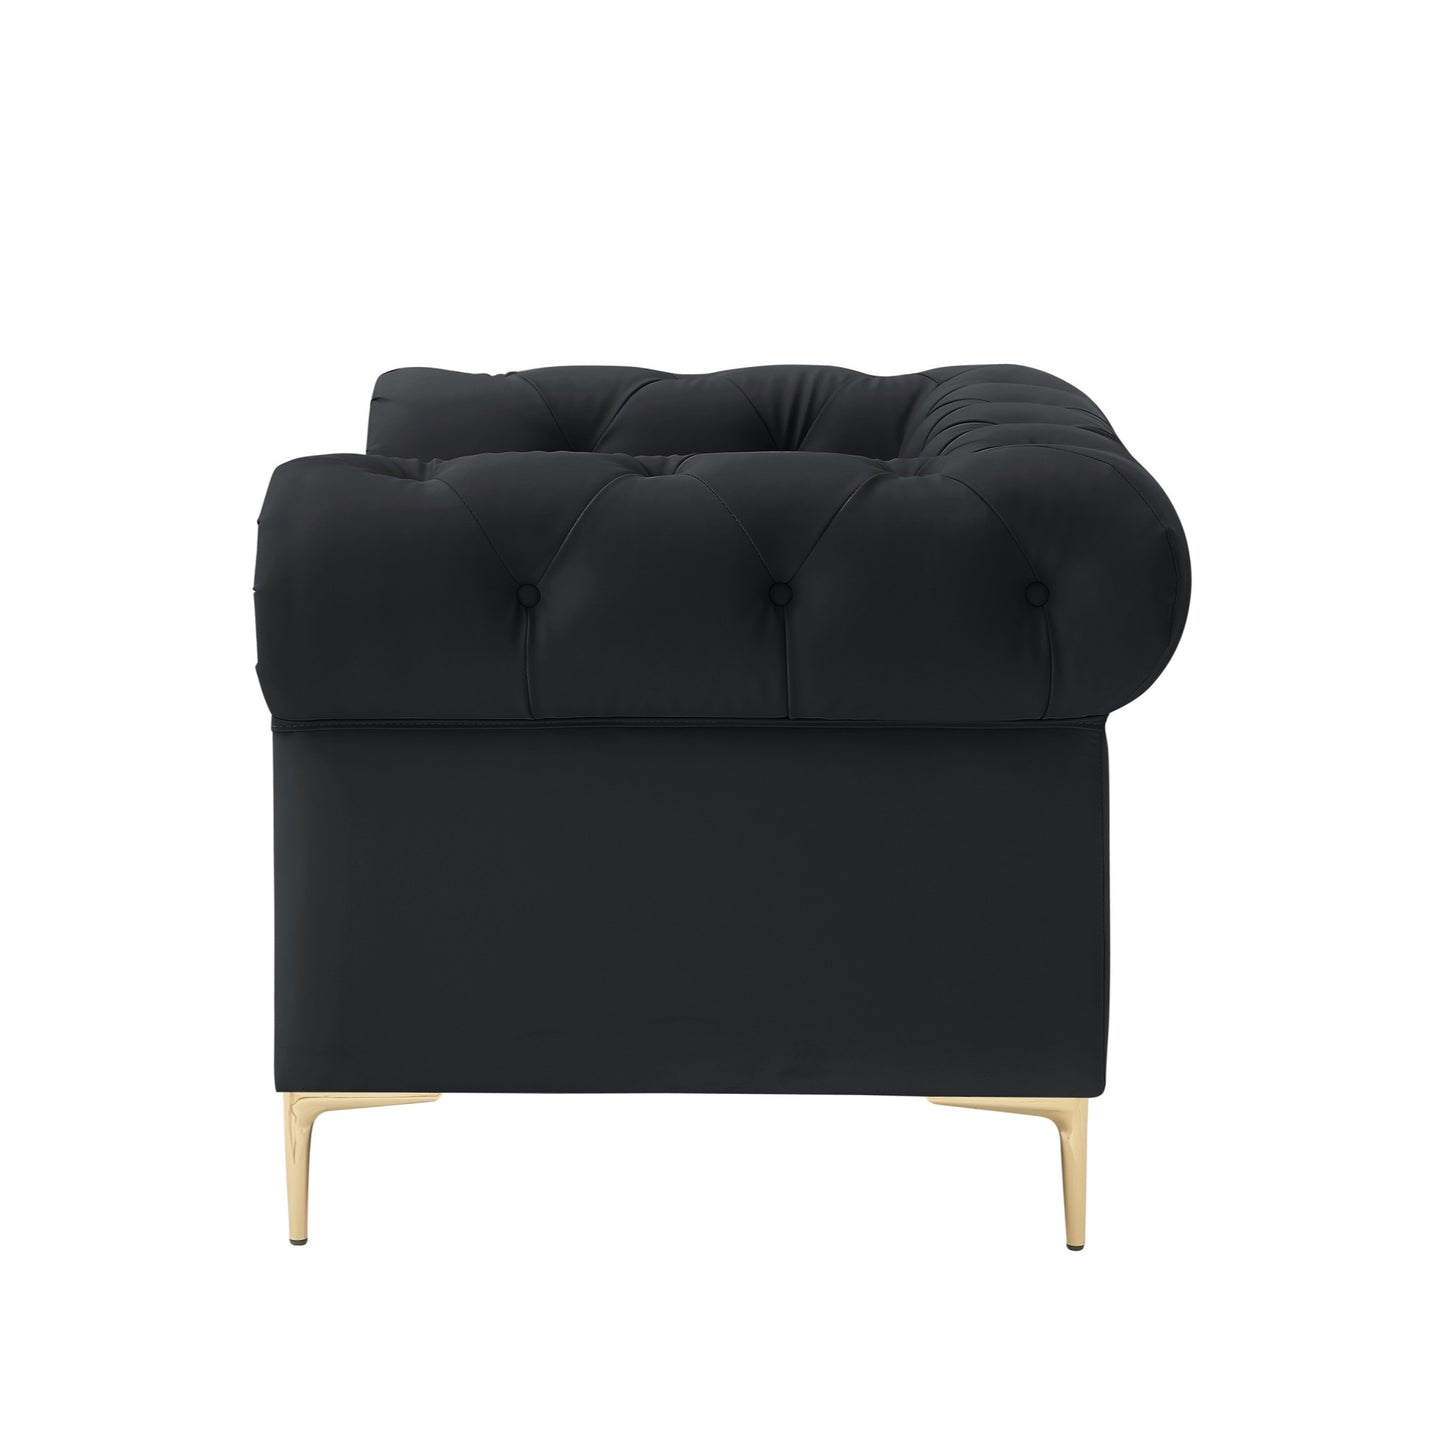 34" Black And Gold Faux leather Tufted Chesterfield Chair